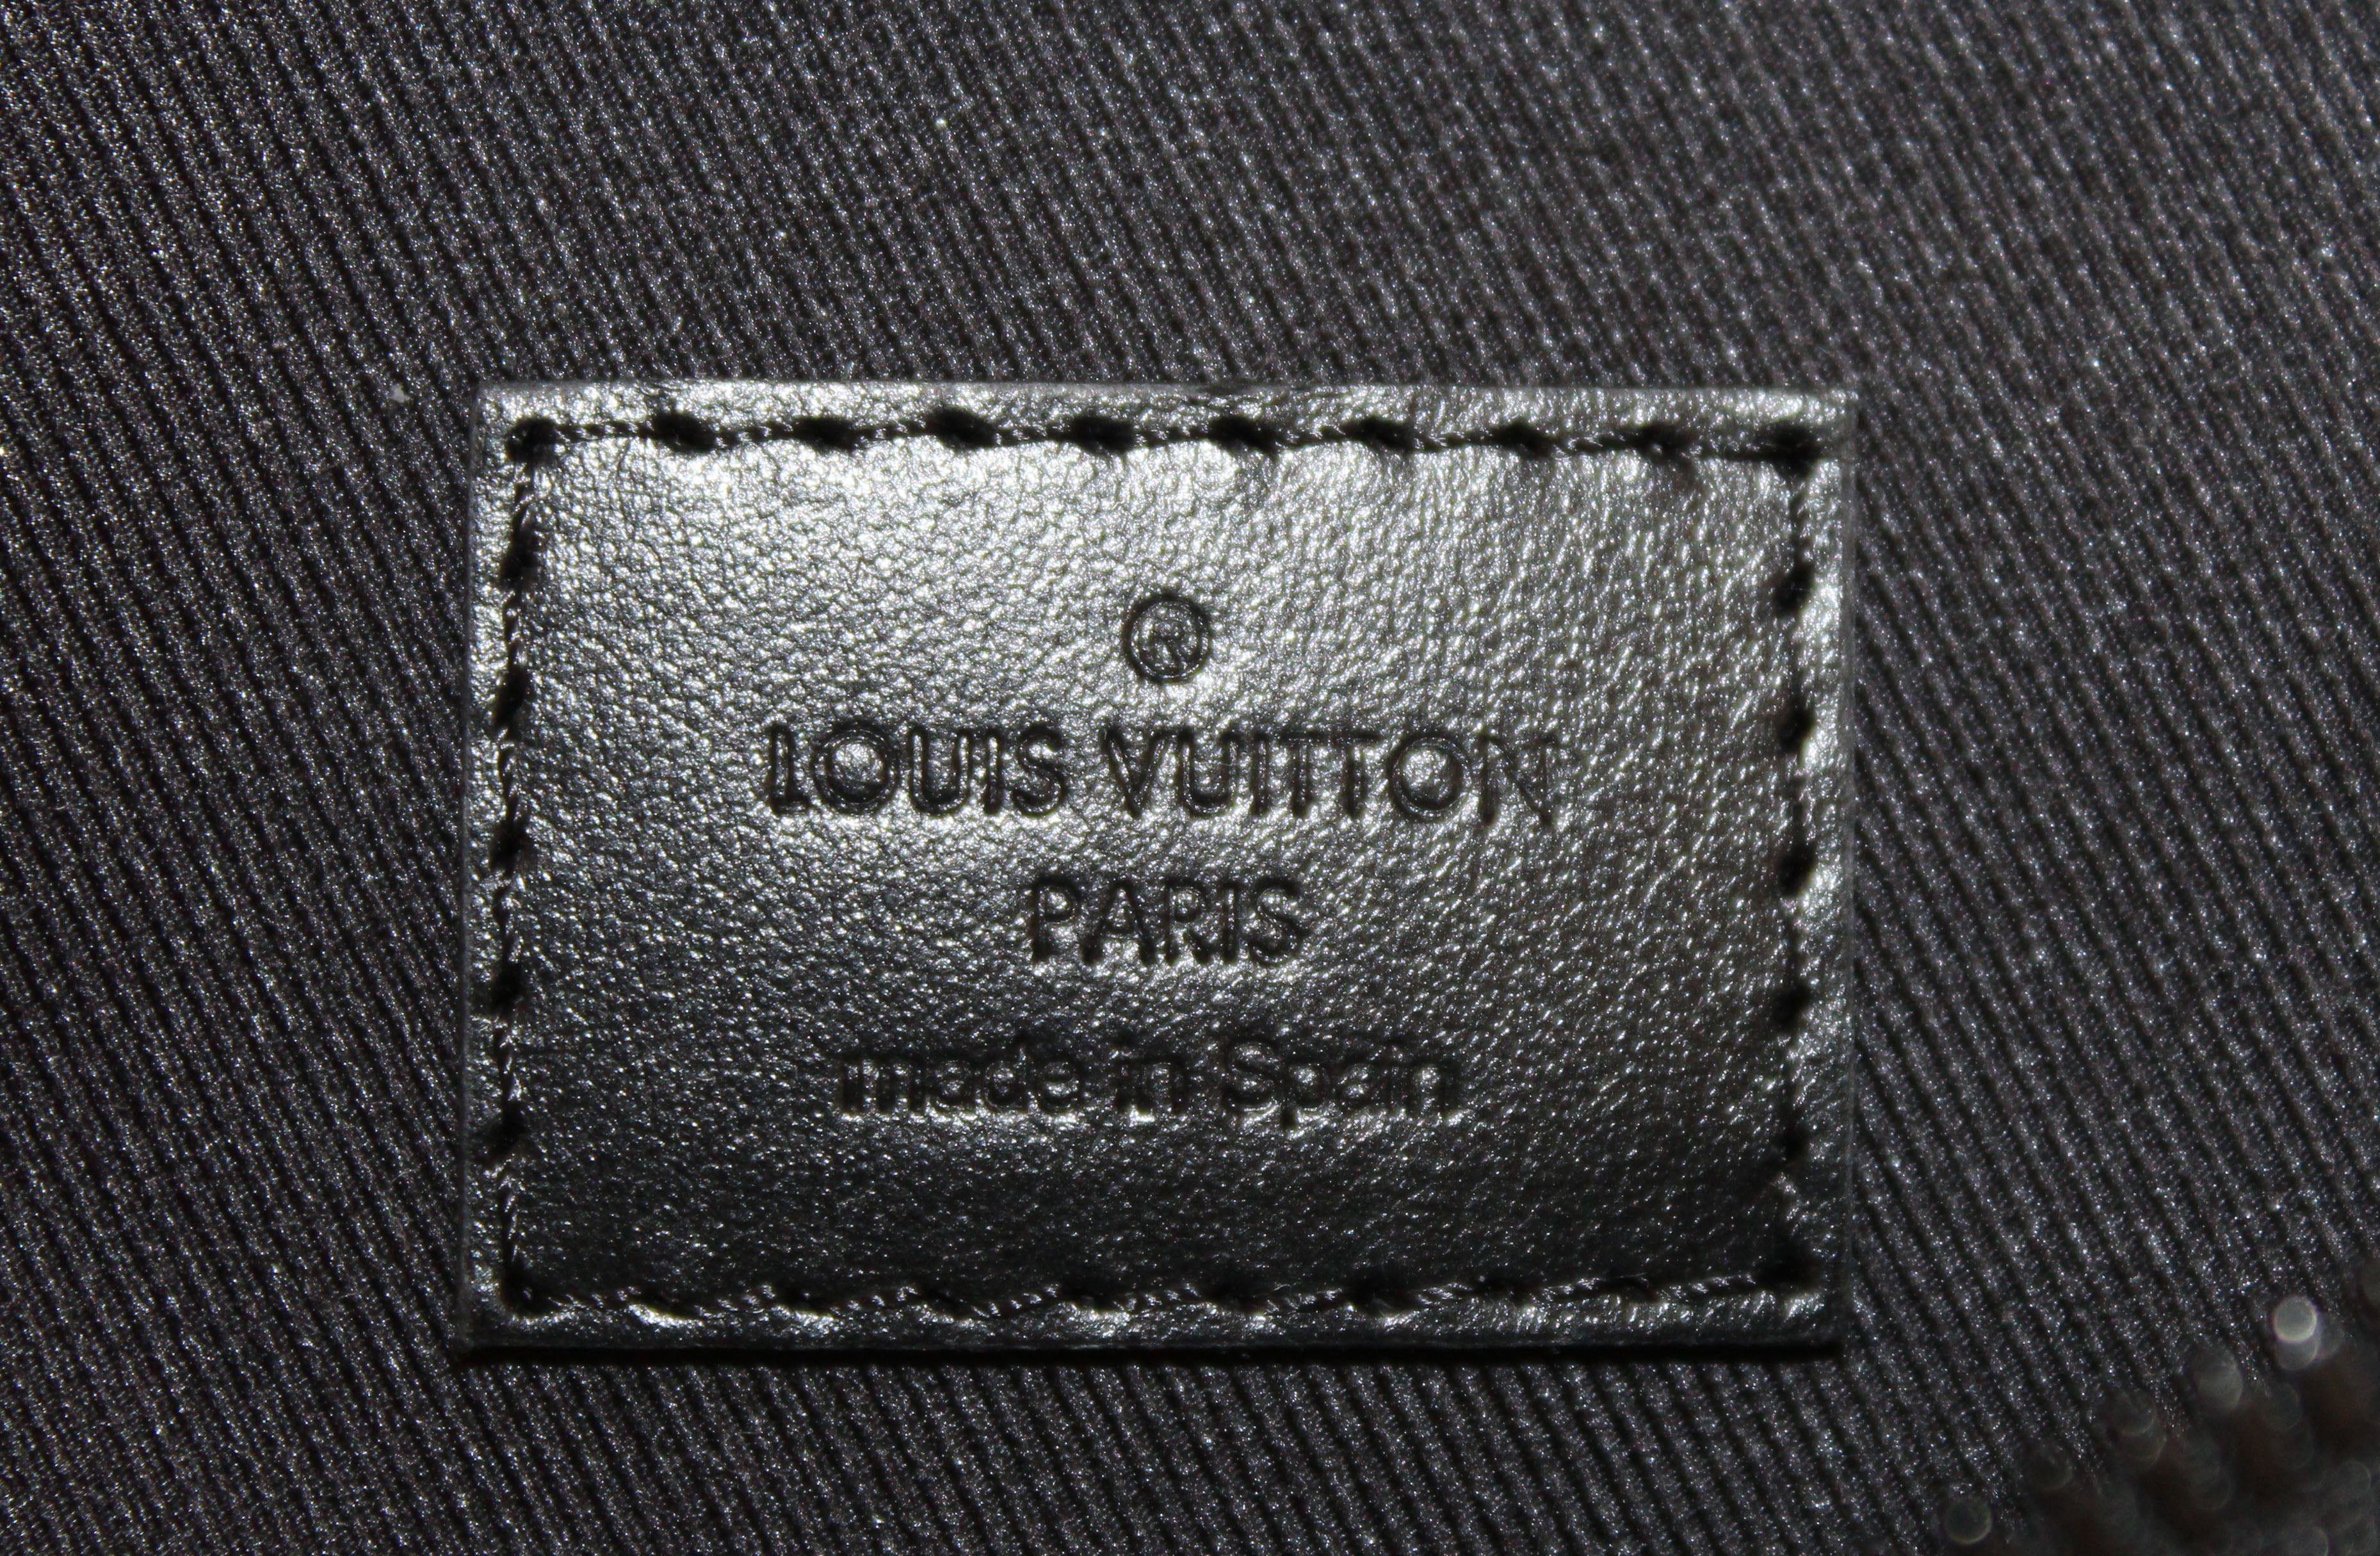 Louis Vuitton Discovery Bumbag Monogram Shadow Leather Black 1451883